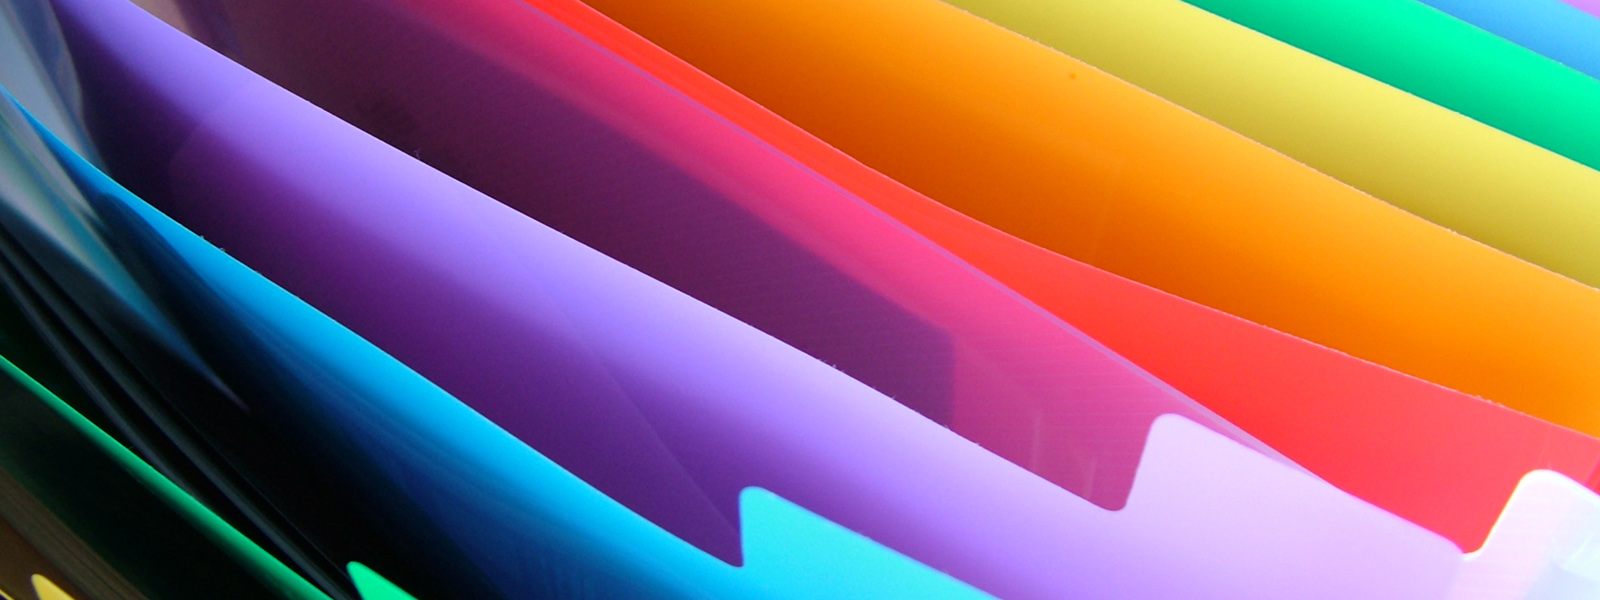 colorful extruded file dividers